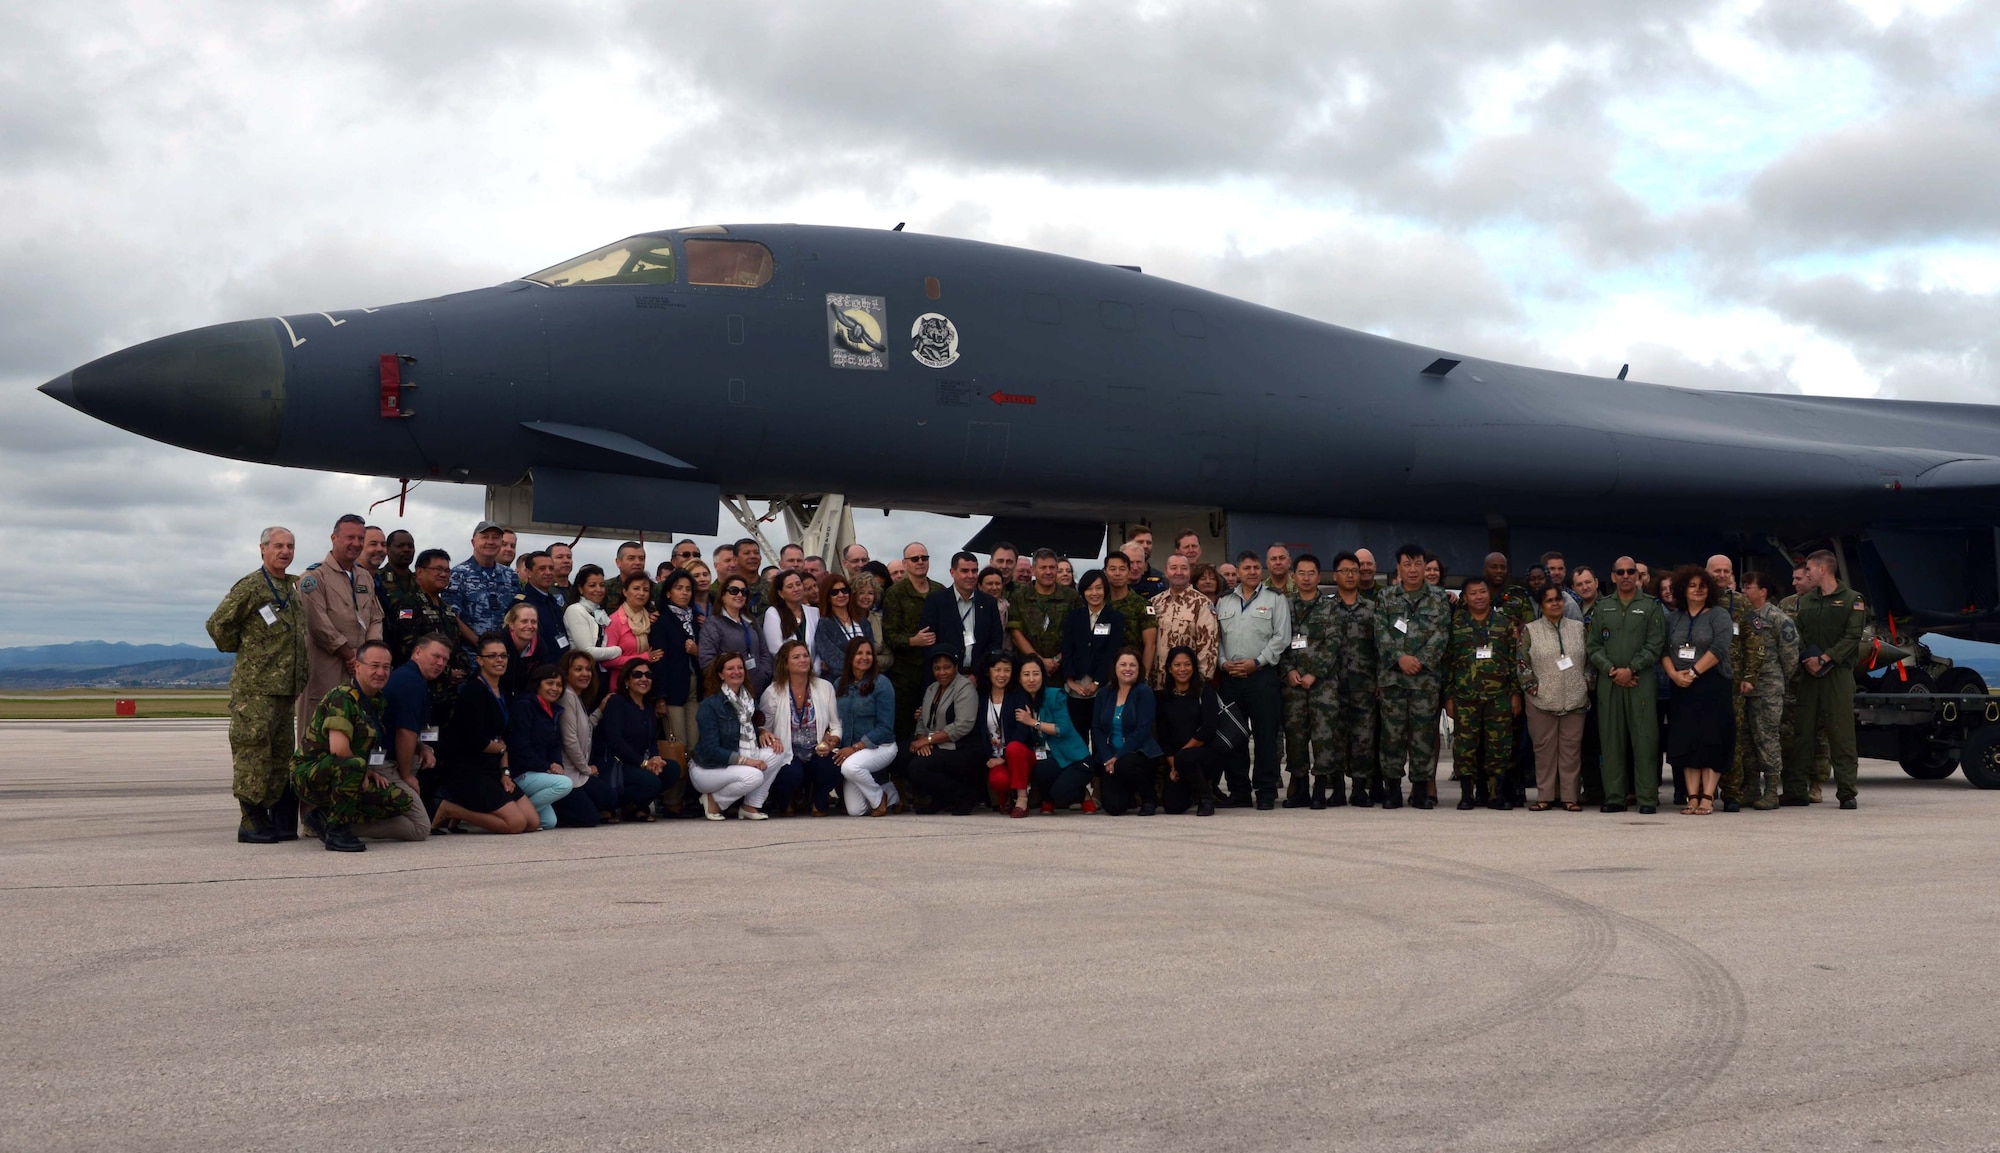 Members of a delegation of foreign Attachés stand for a group photo in front of a B-1 bomber at Ellsworth Air Force Base, S.D., Sept. 12, 2016. The group included more than 30 senior officers from a multitude of countries, including China, the Netherlands and Canada. (U.S. Air Force photo by Airman 1st Class Donald C. Knechtel)